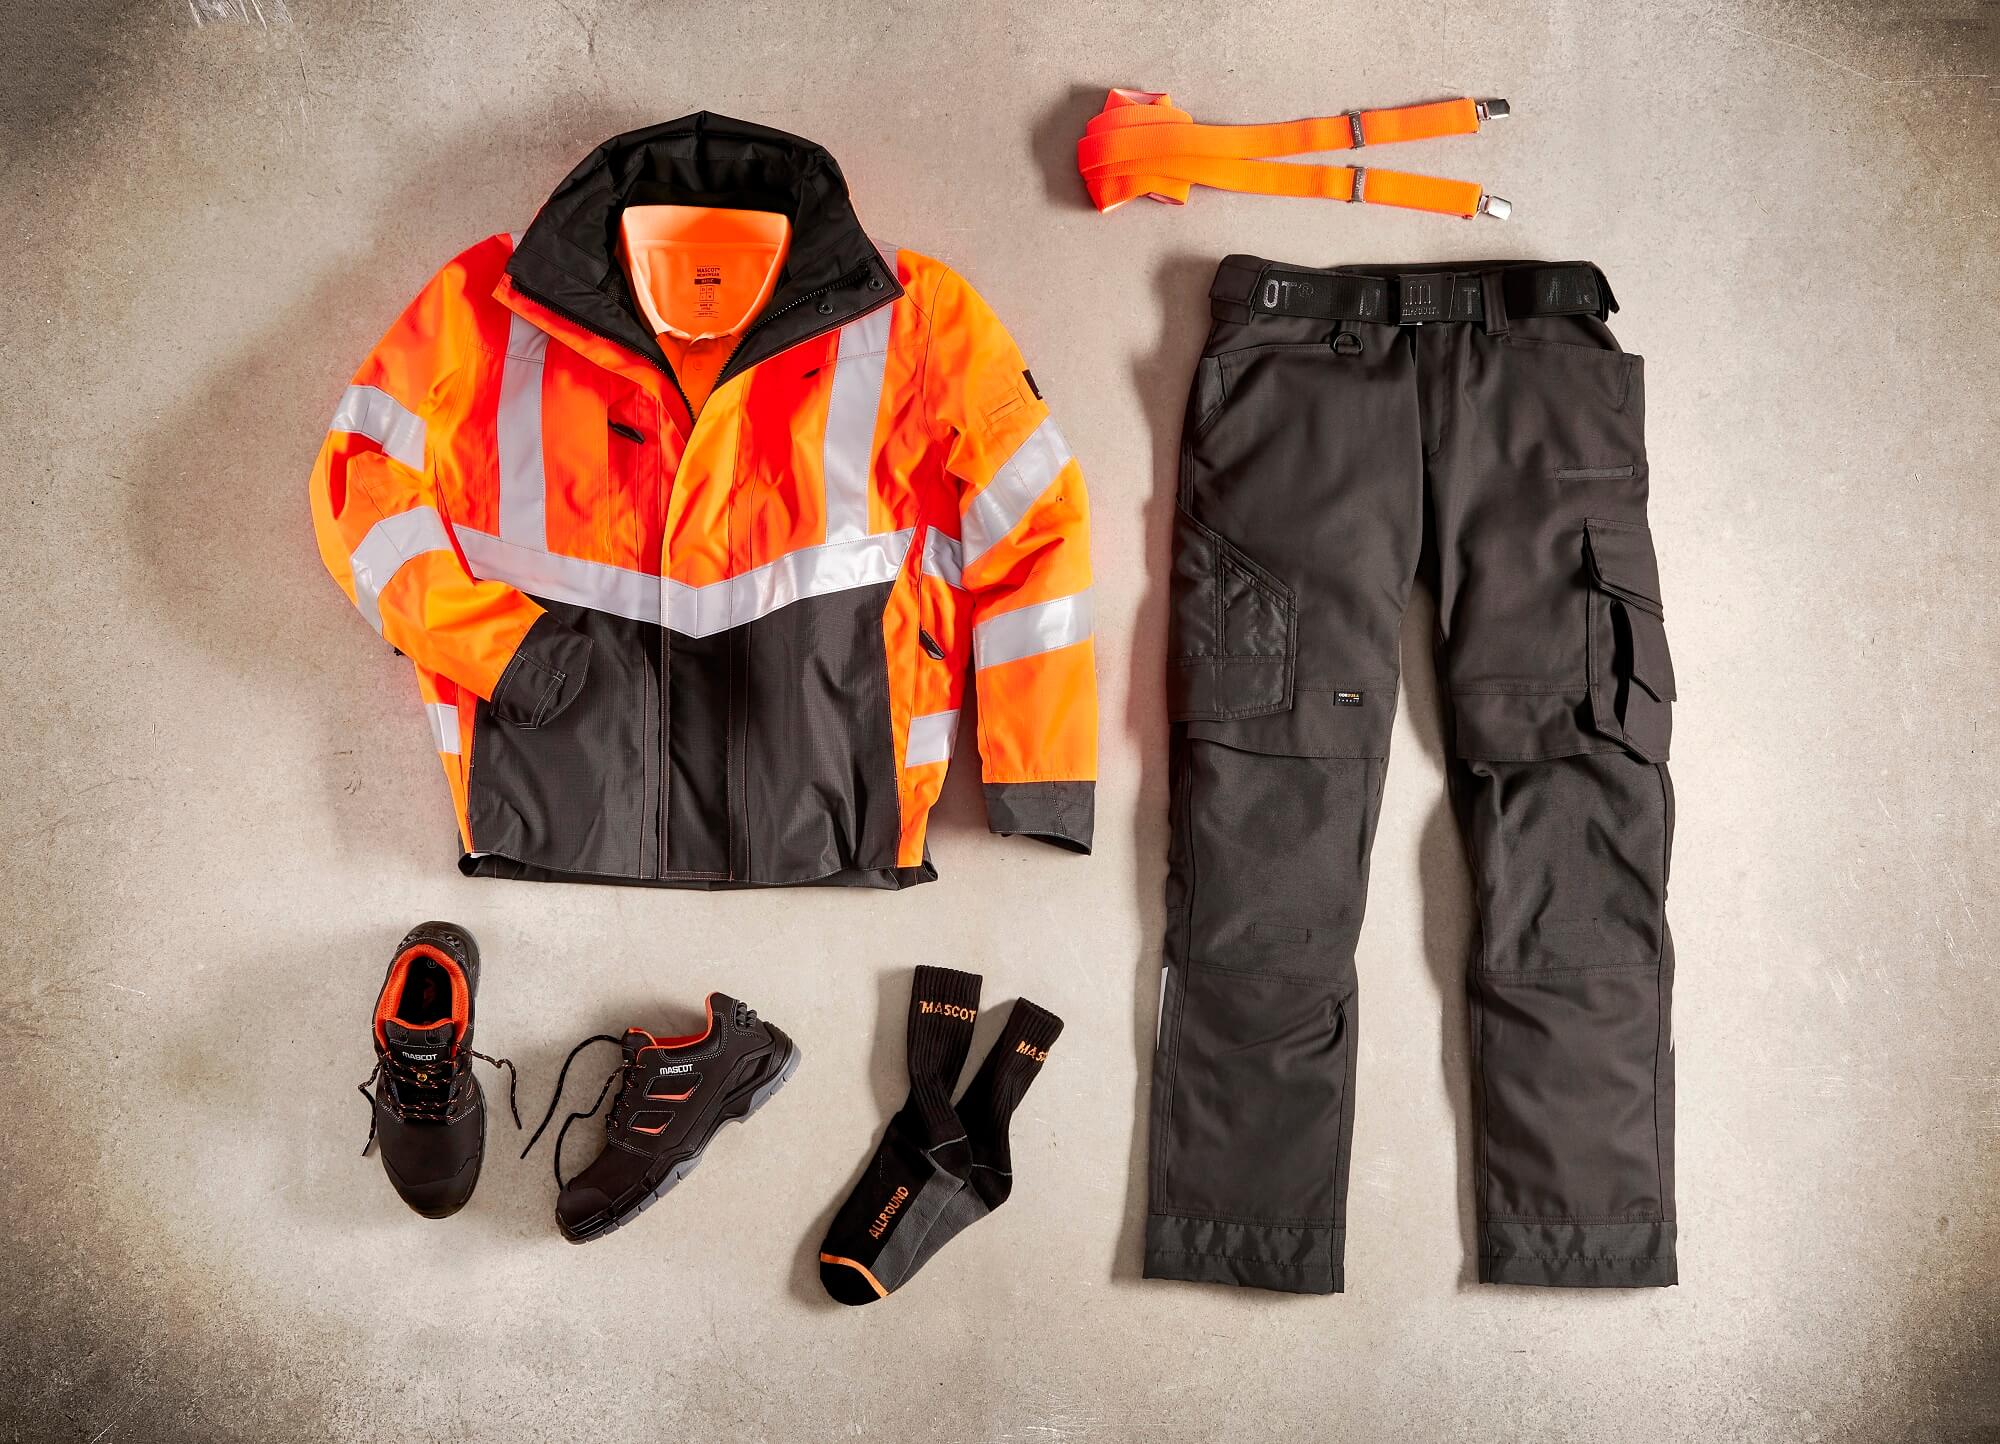 MASCOT's fluorescent orange workwear with reflective bands